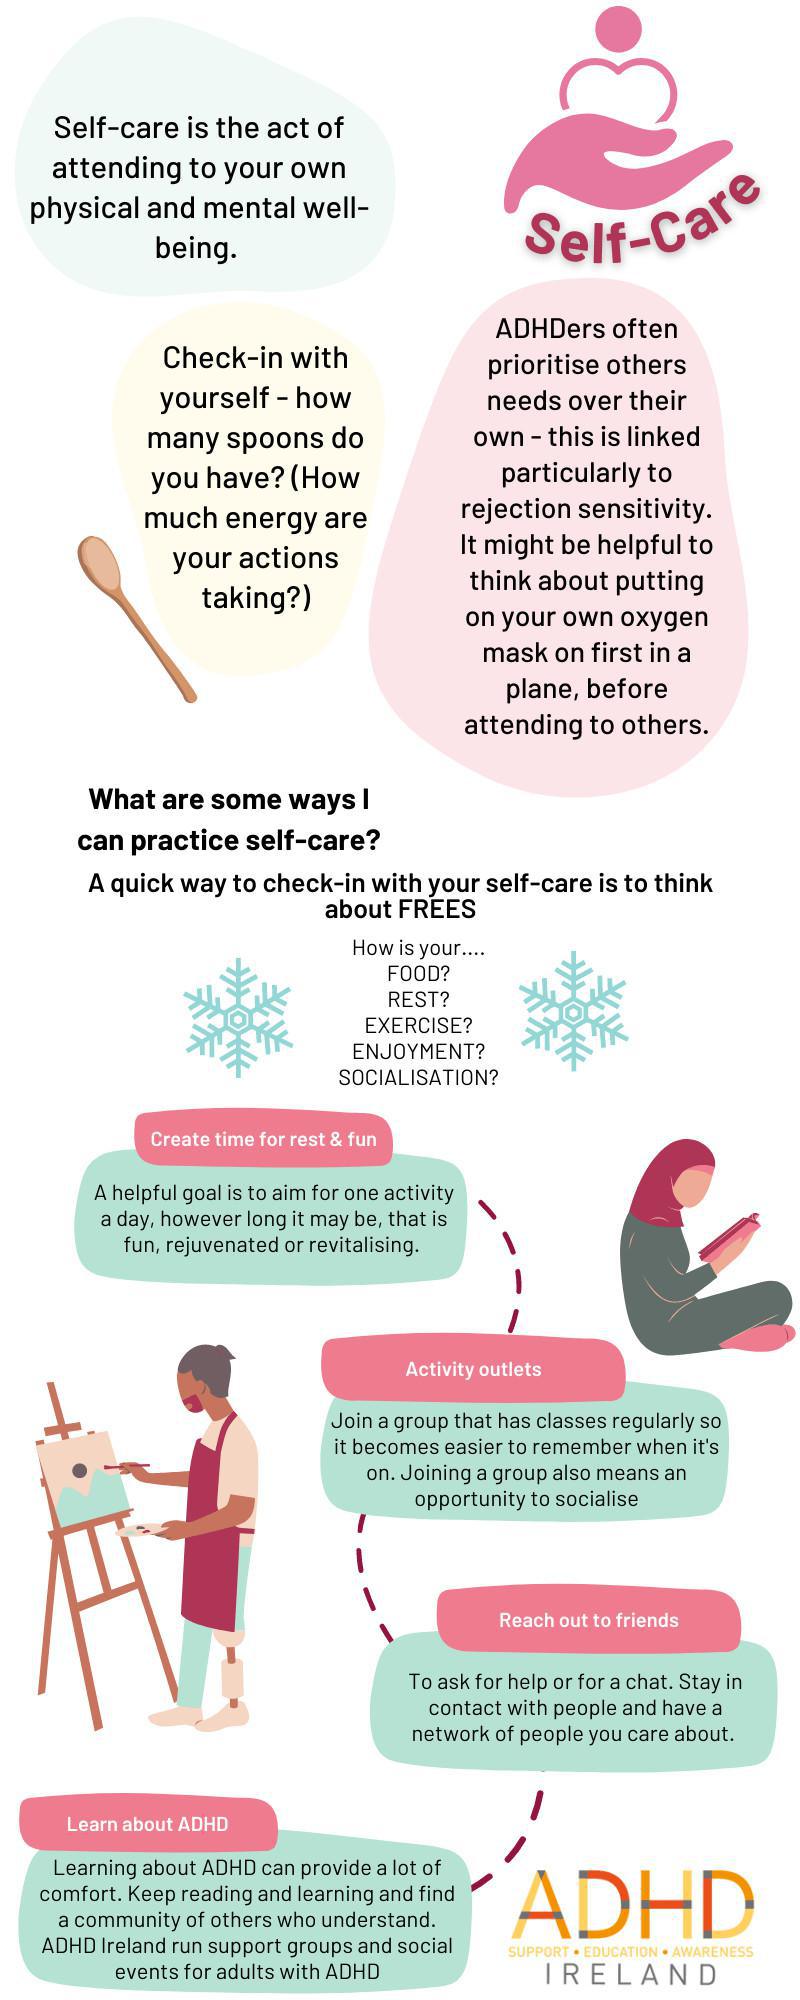 What is self-care?